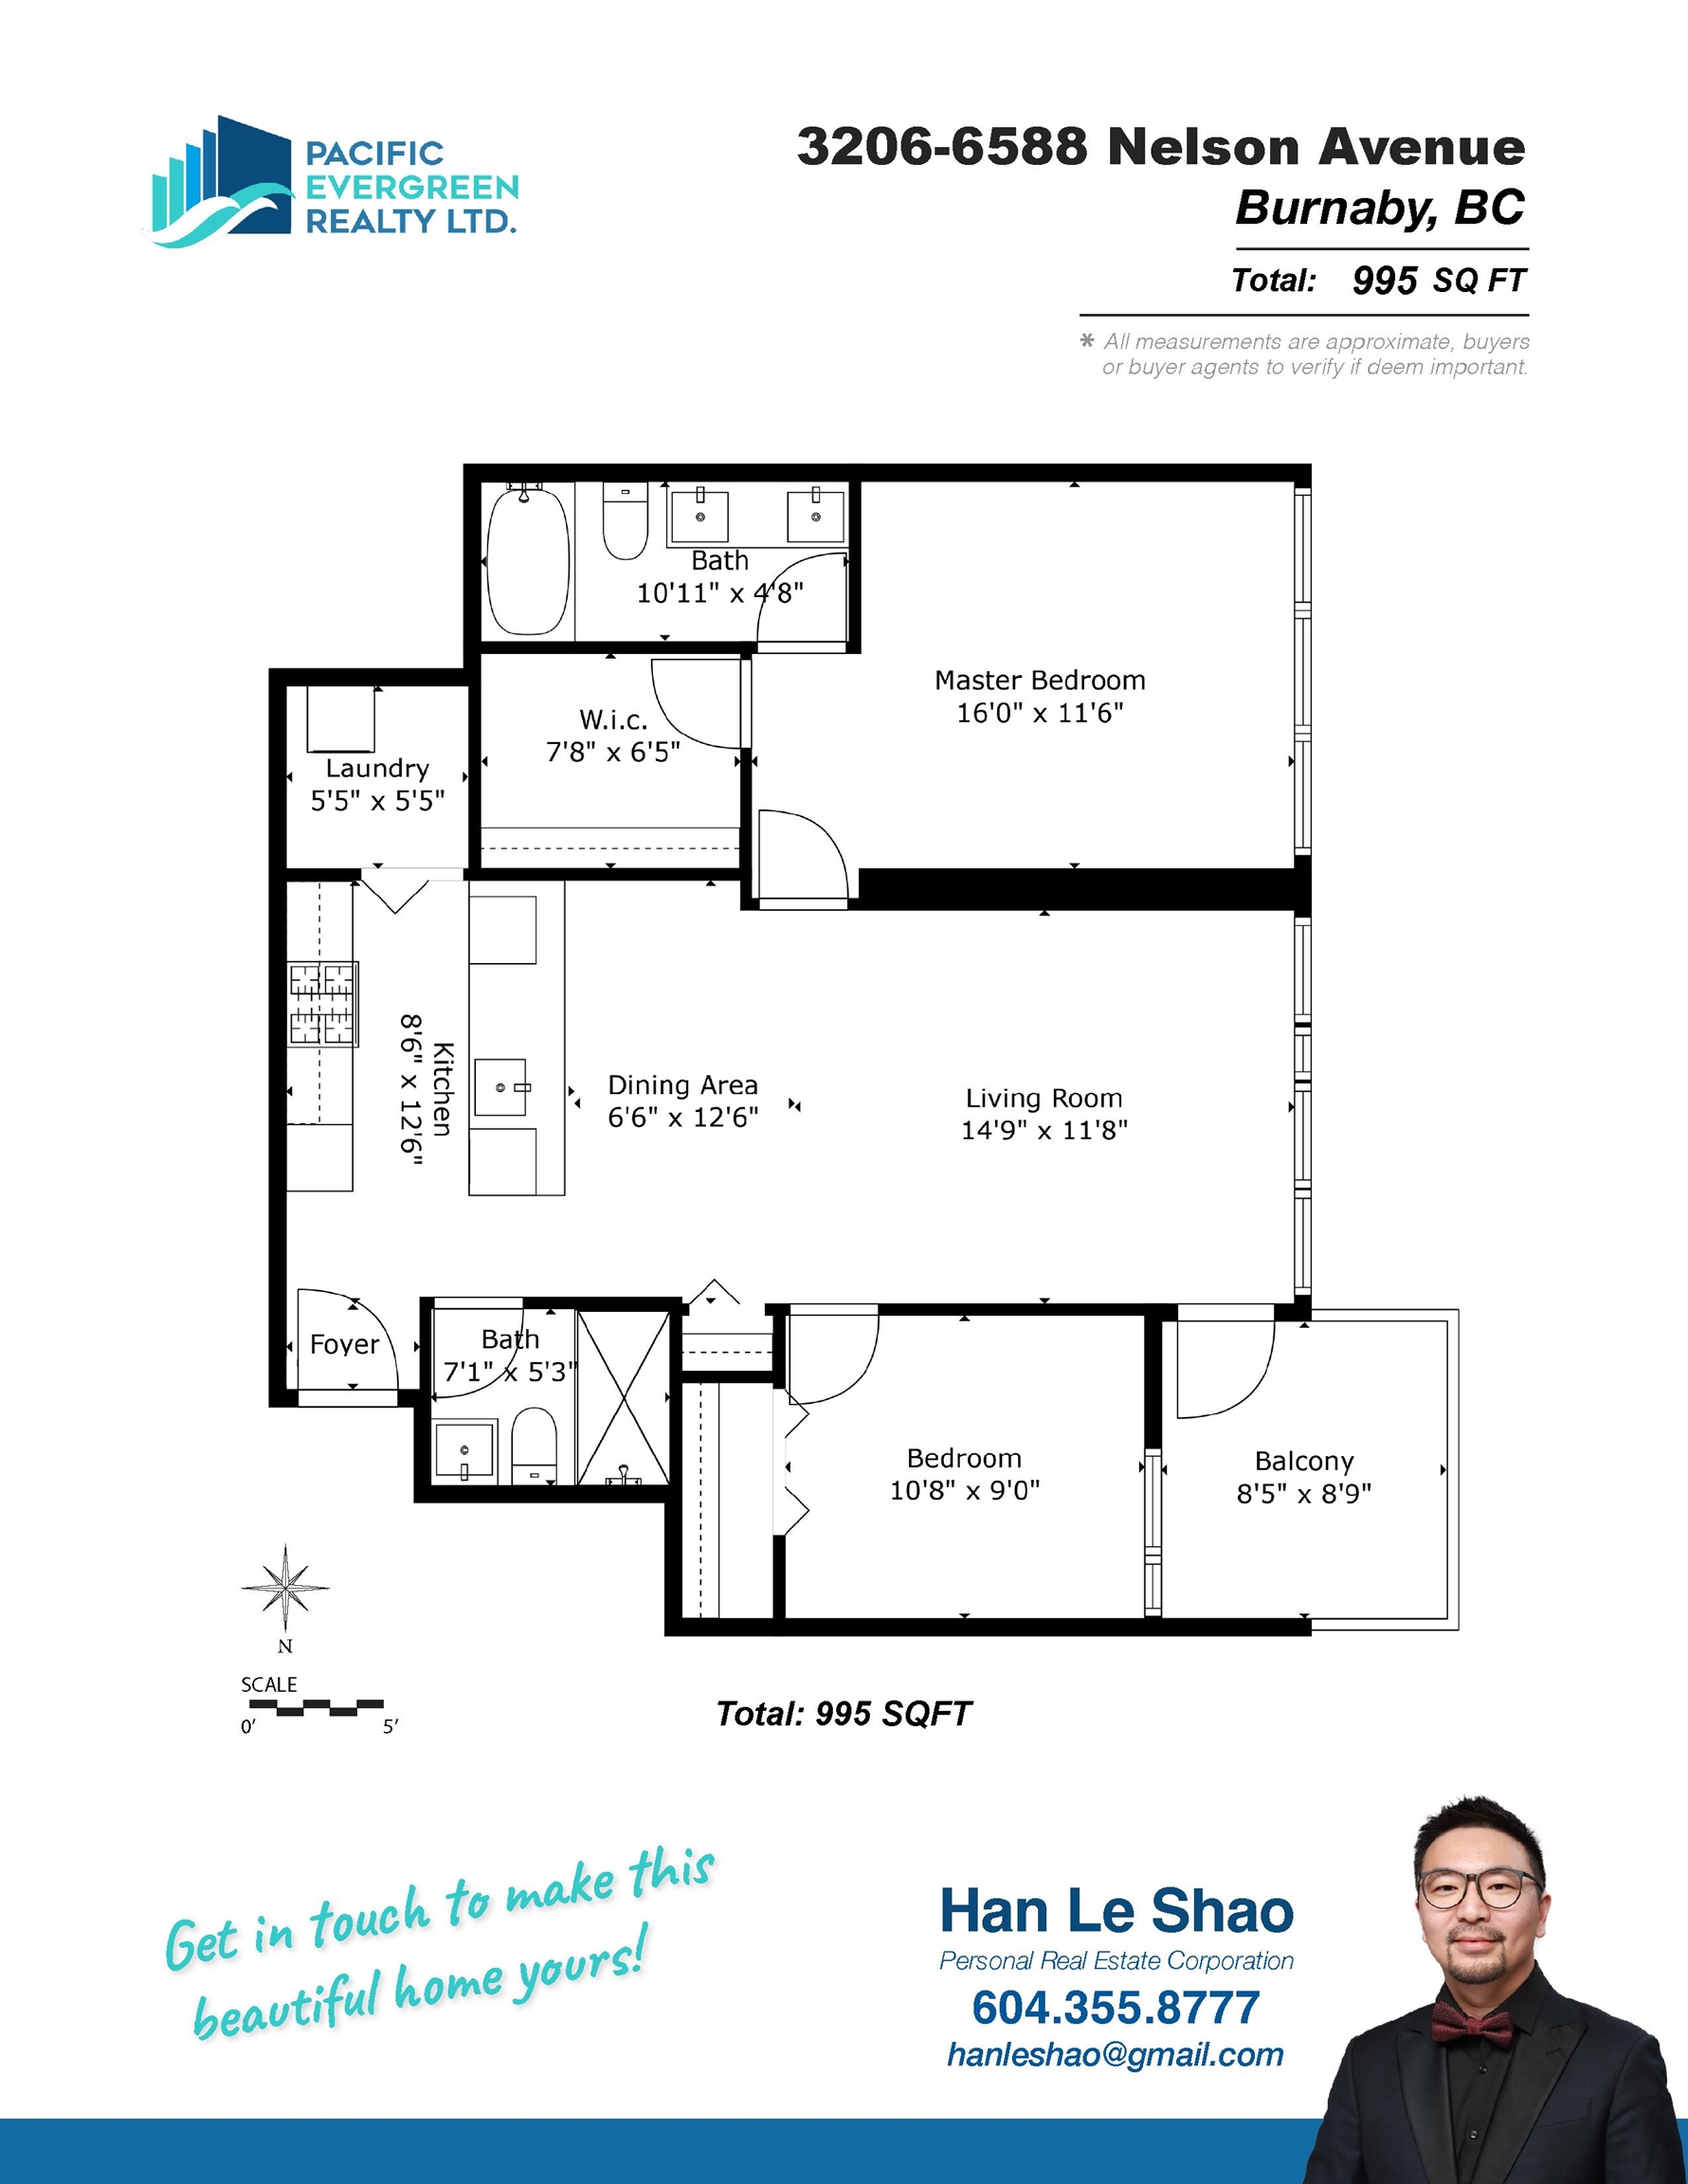 Listing image of 3206 6588 NELSON AVENUE